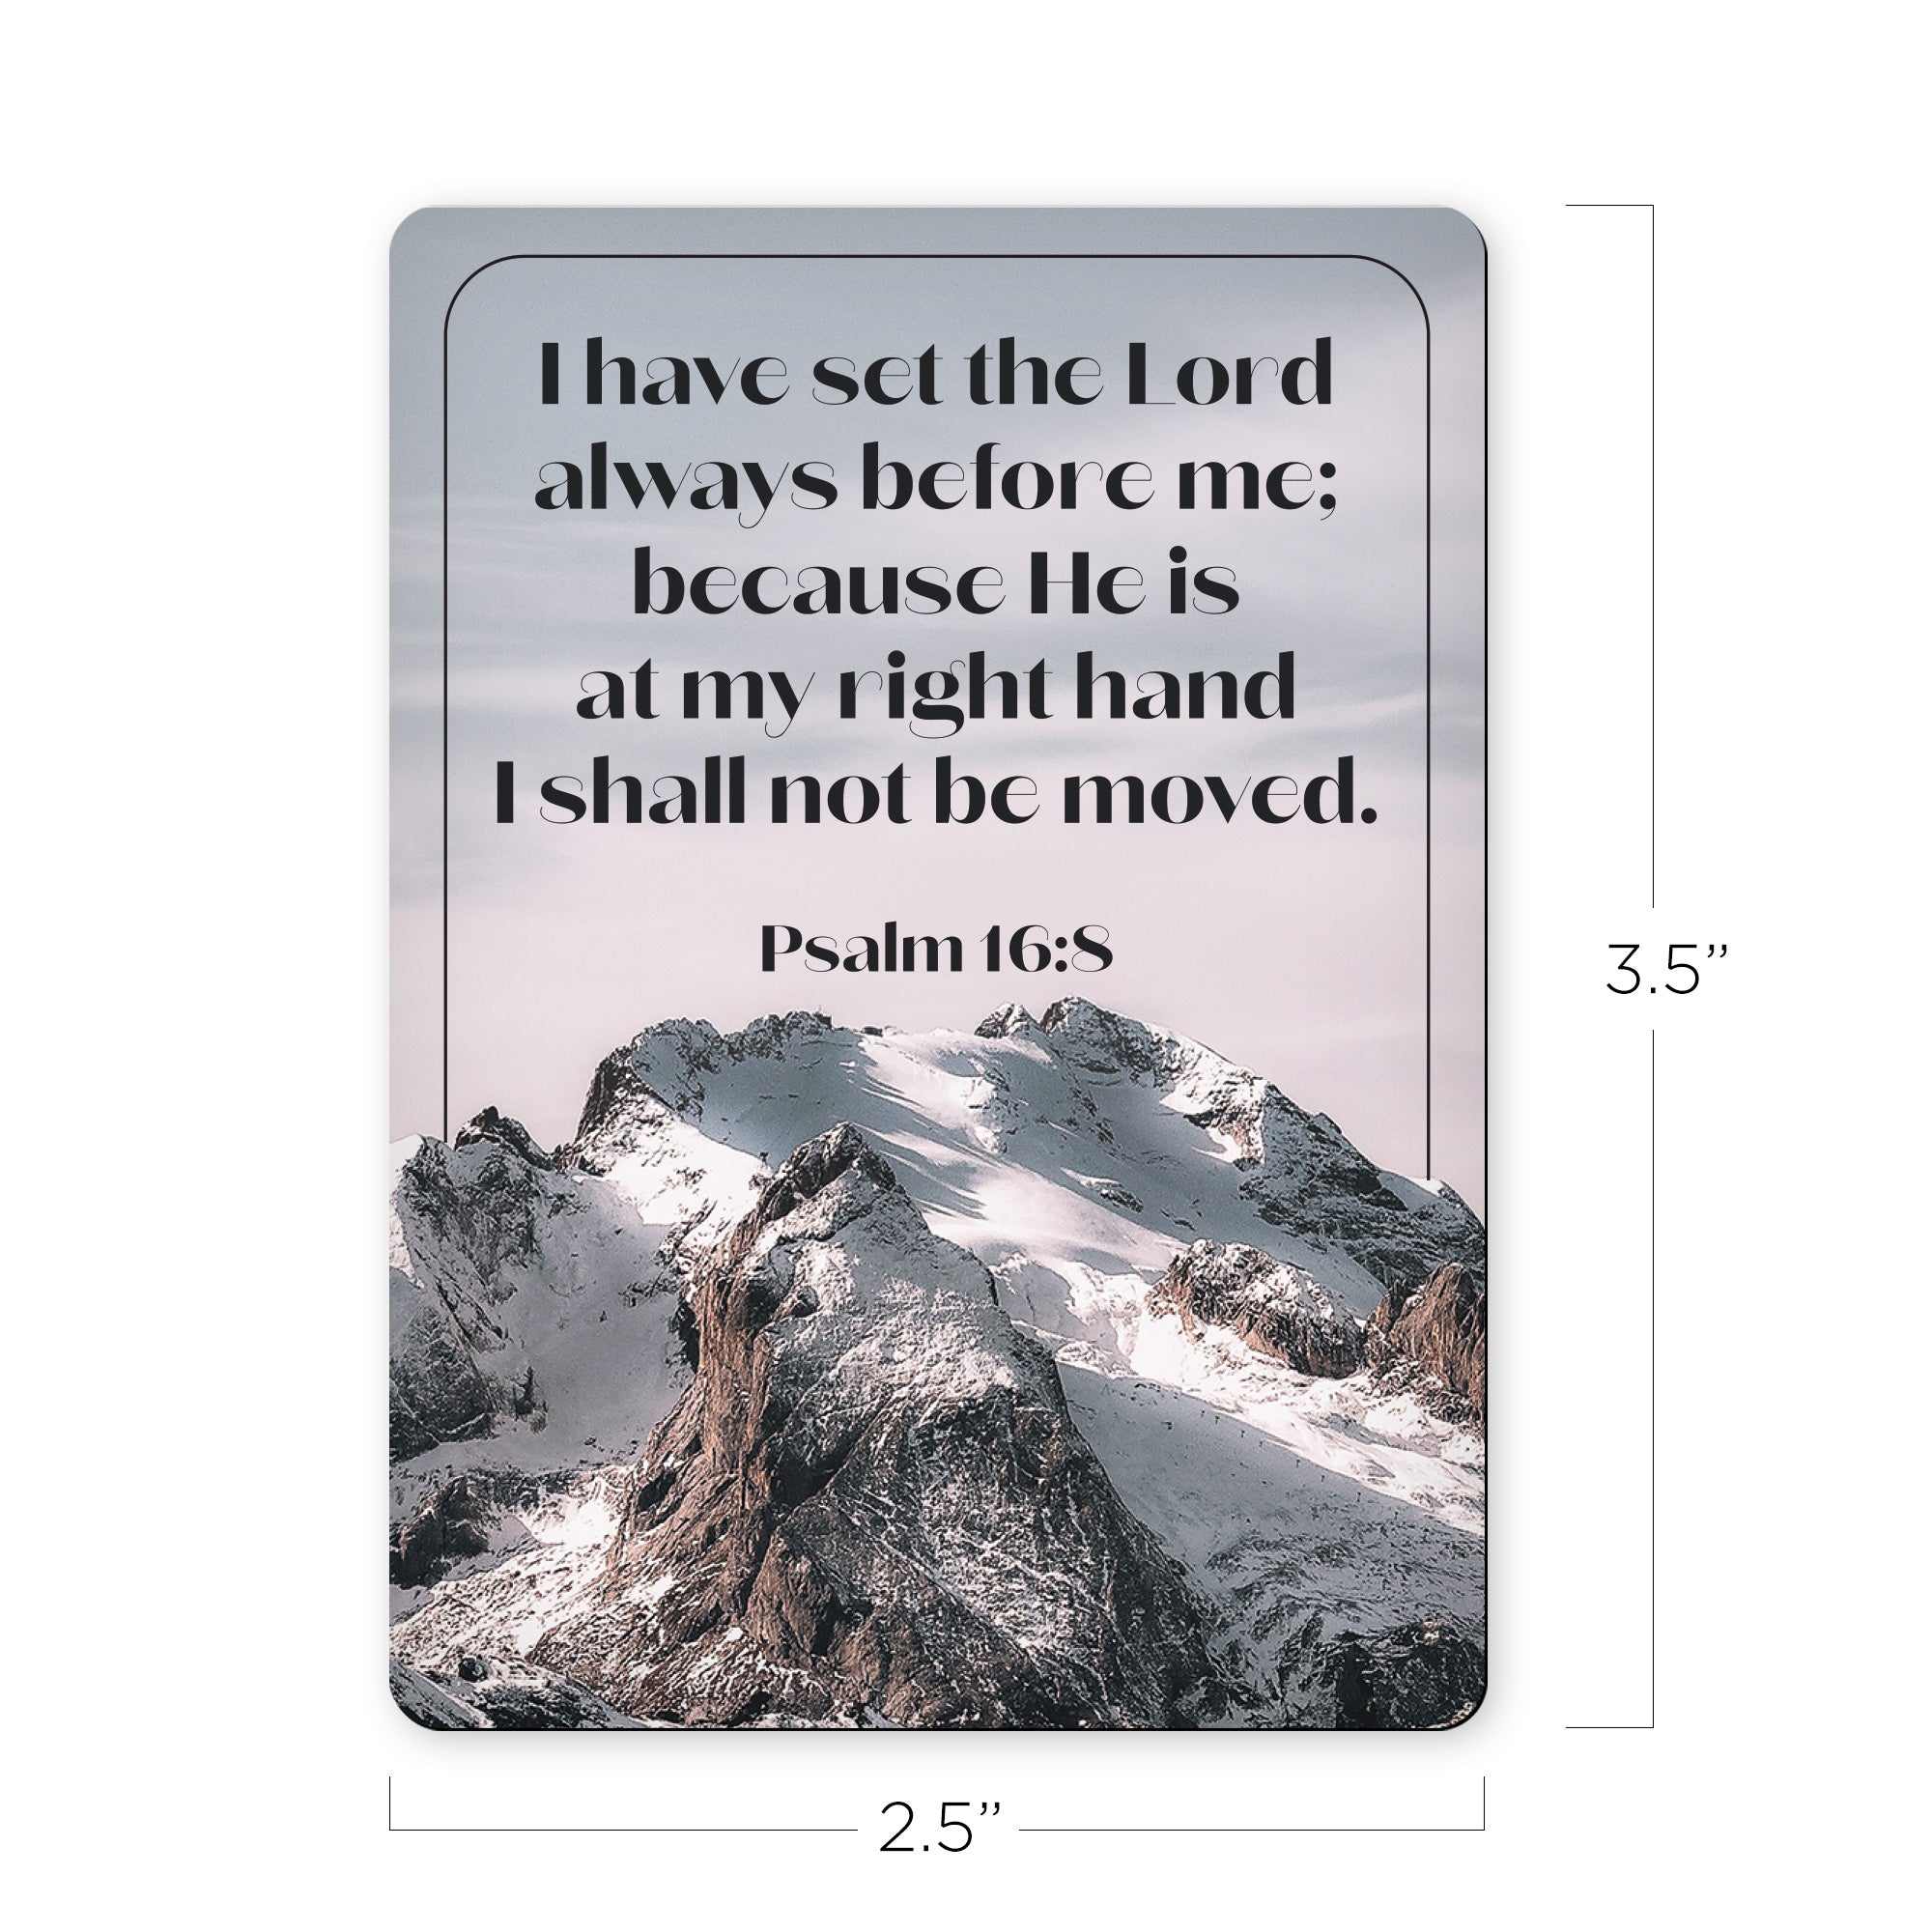 I shall not be moved - Psalm 16:8 - Scripture Magnet